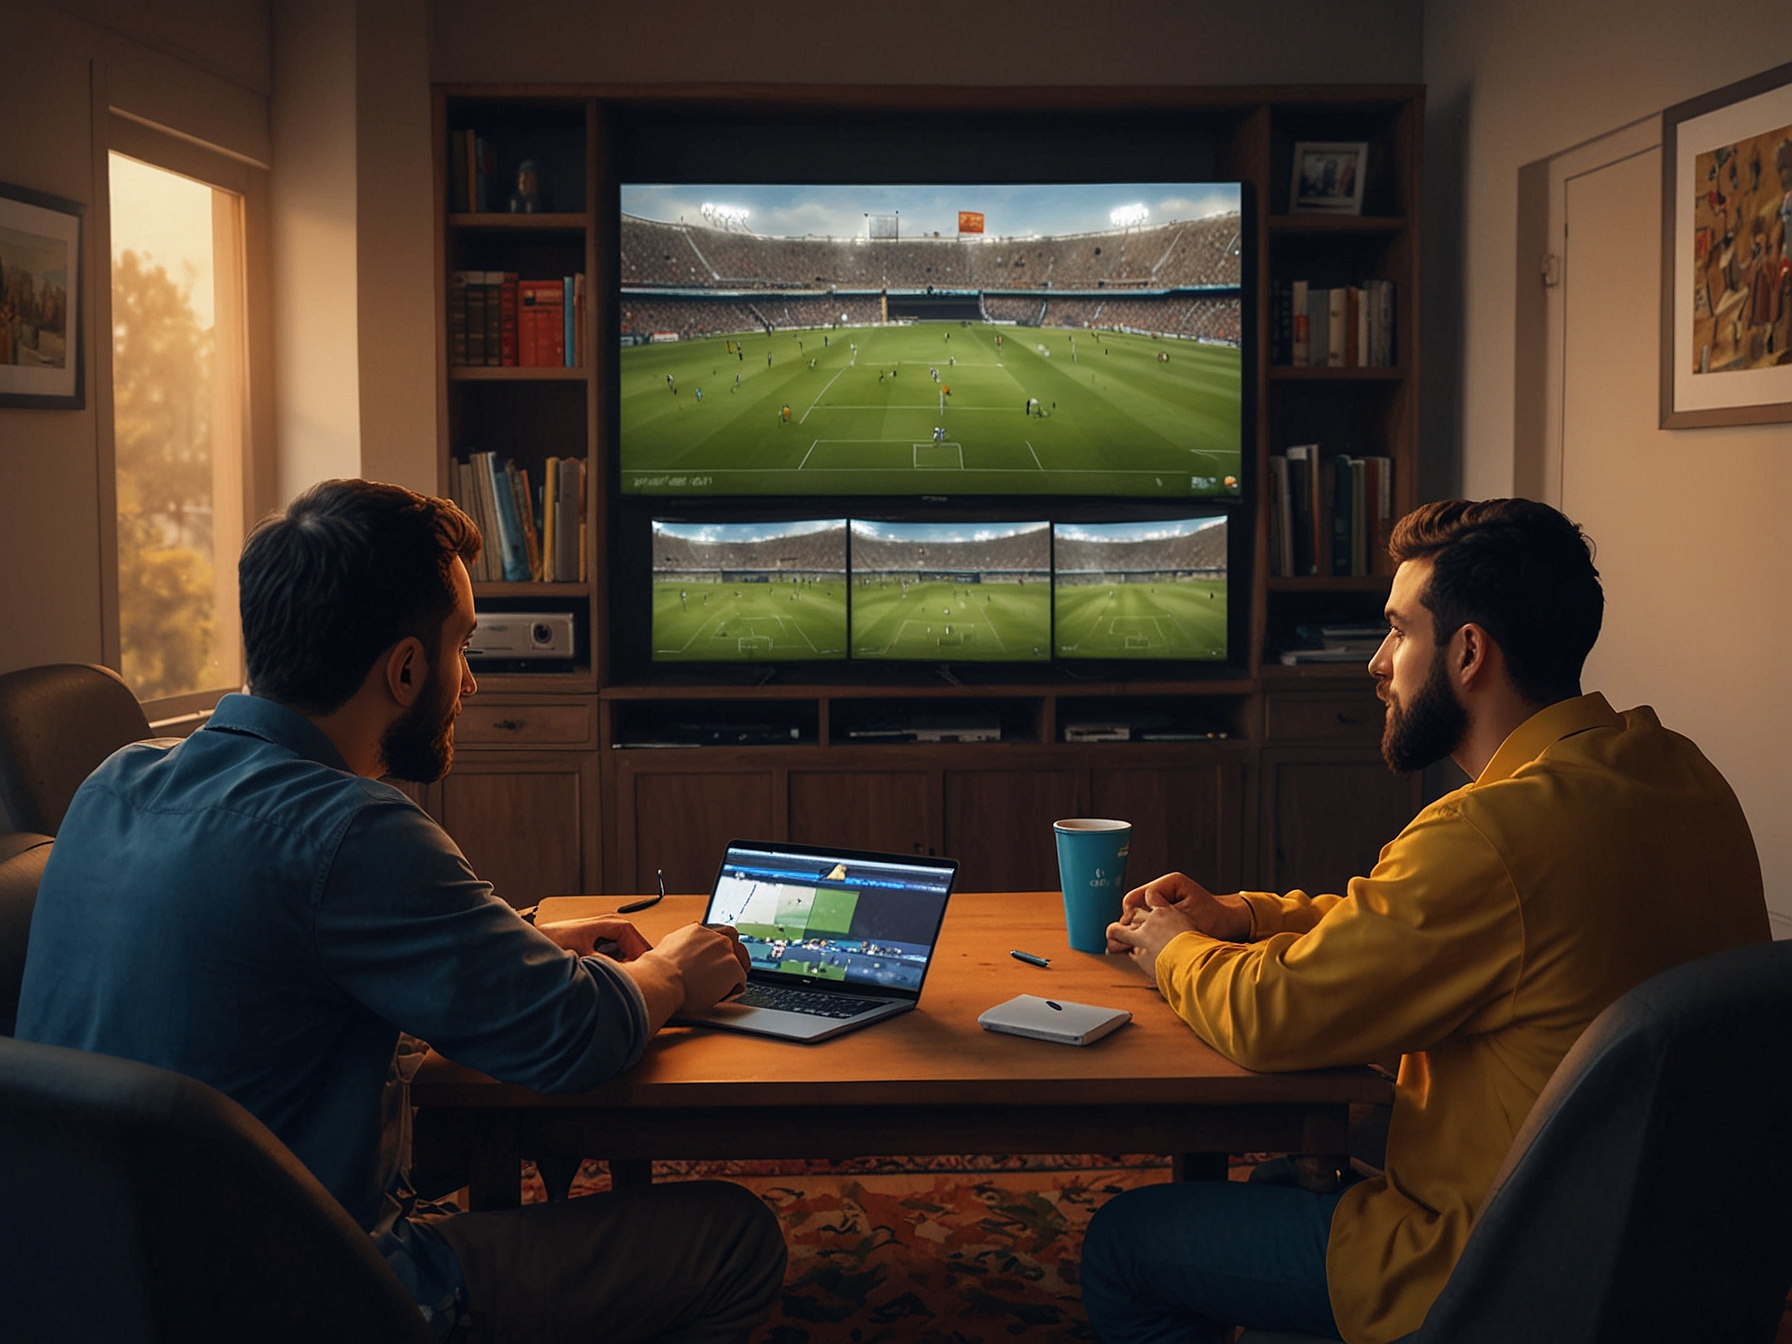 Fans using various devices like TVs, laptops, and smartphones to catch the live action of the Afghanistan vs Australia match, showcasing the multiple streaming and viewing options available.